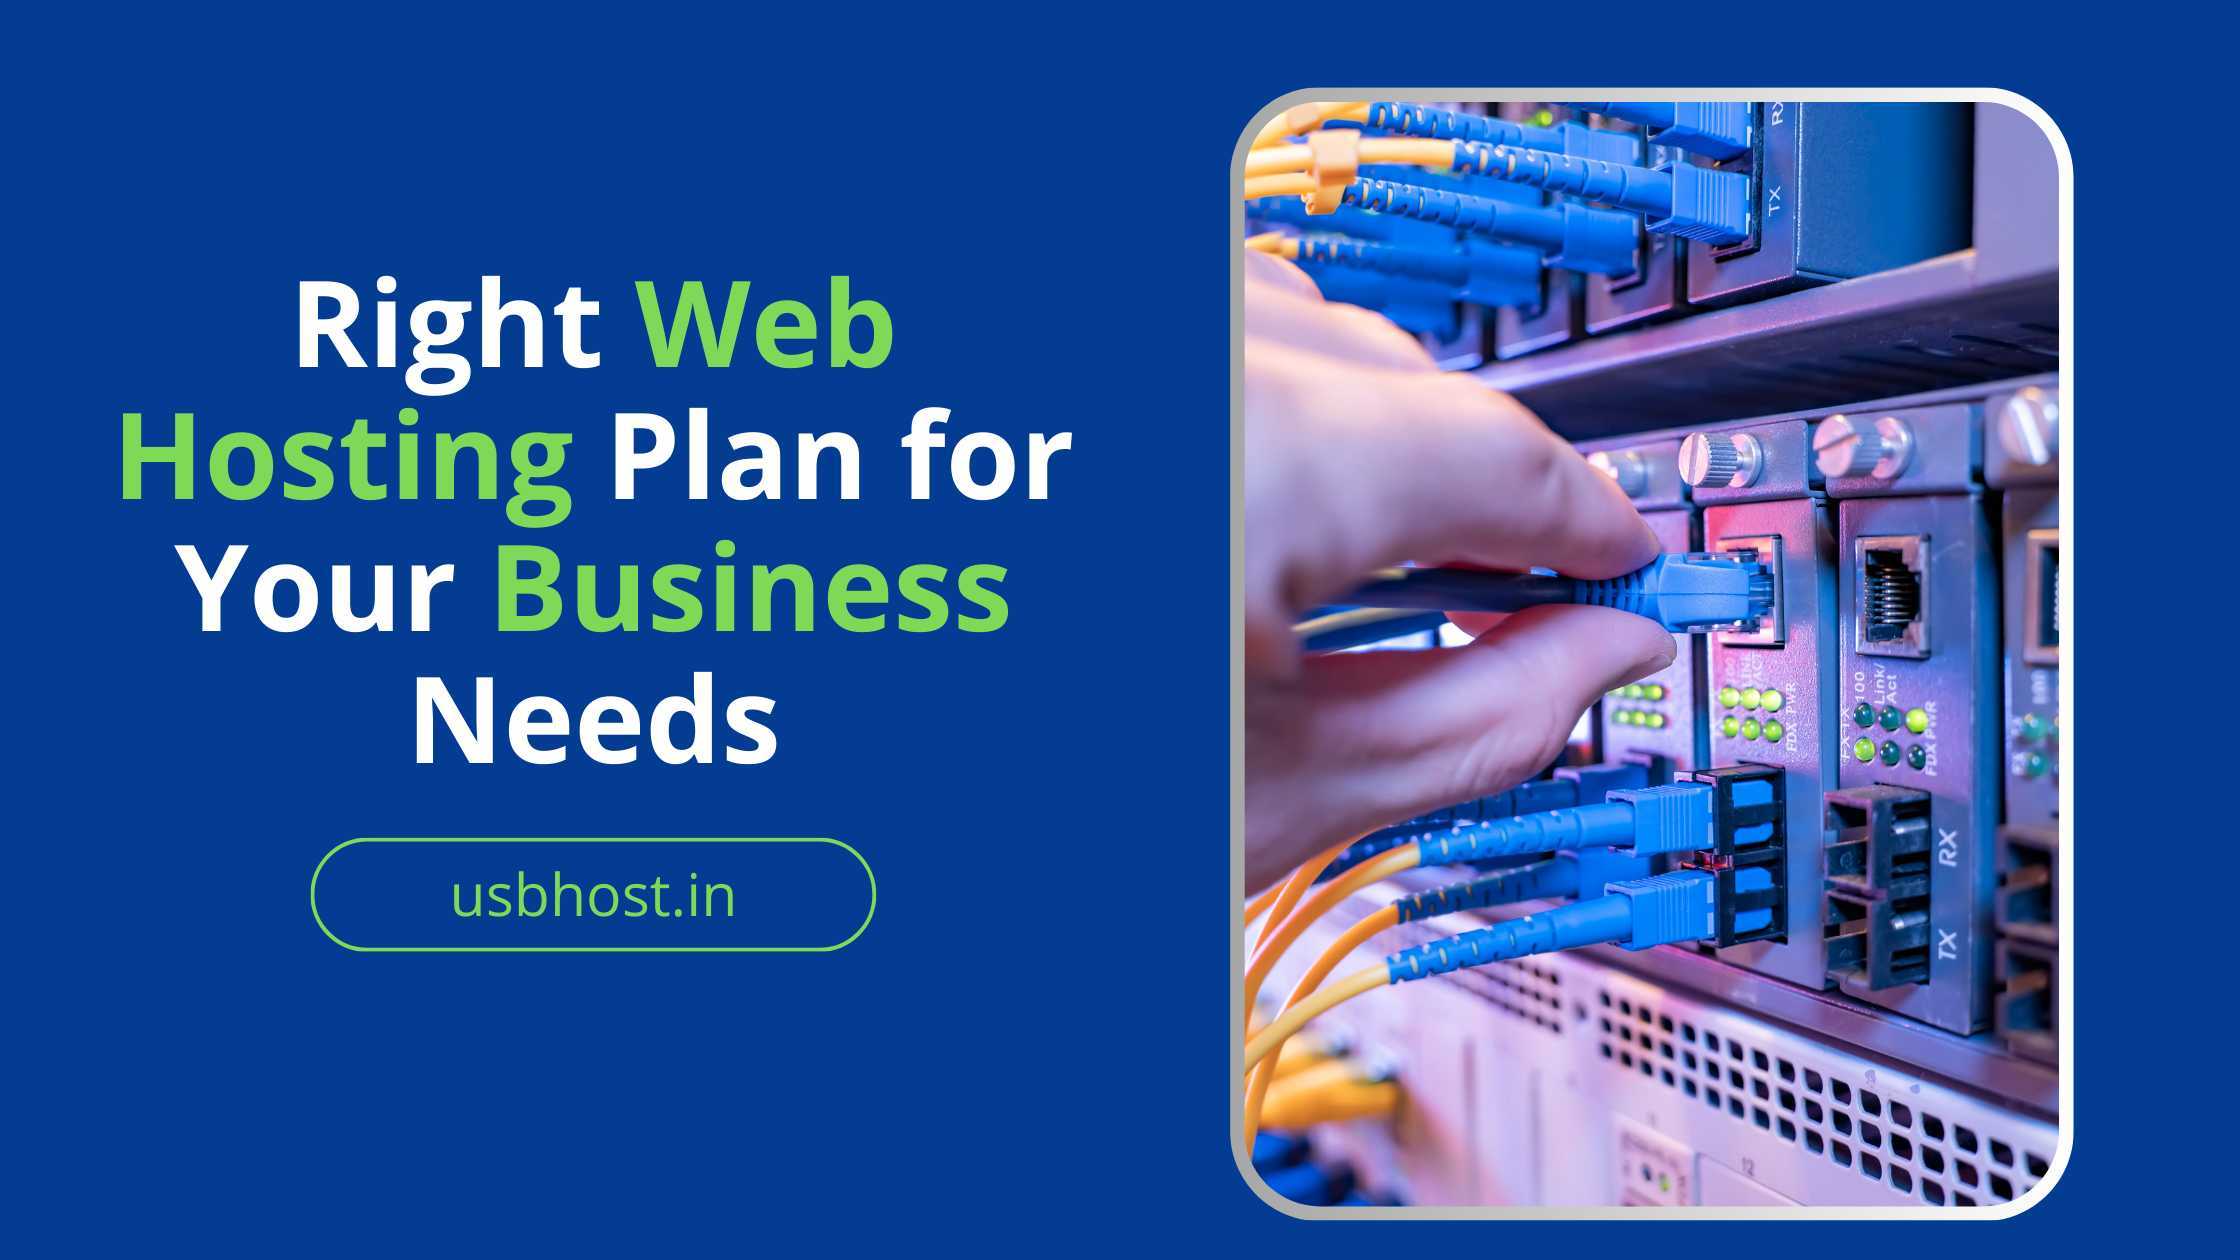 Choosing-the-Right-Web-Hosting-Plan-for-Your-Business-Needs